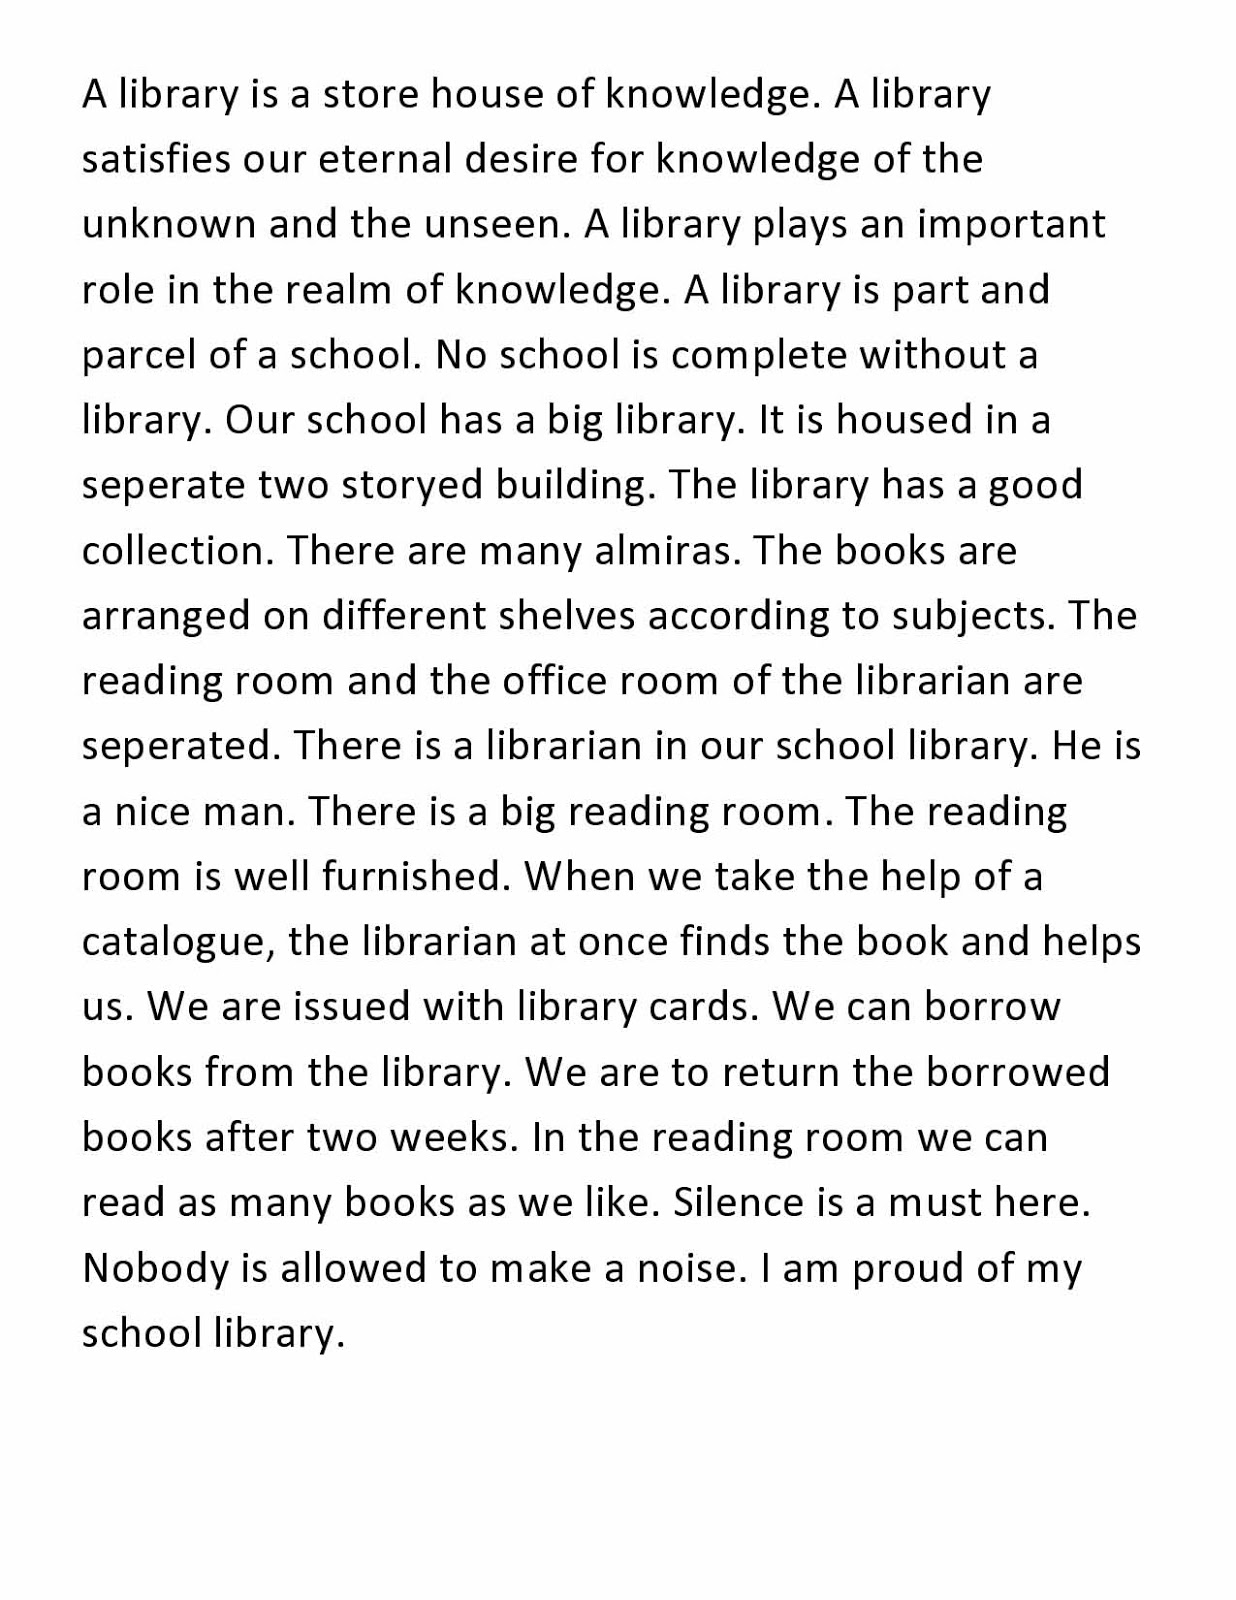 my school library essay for class 2